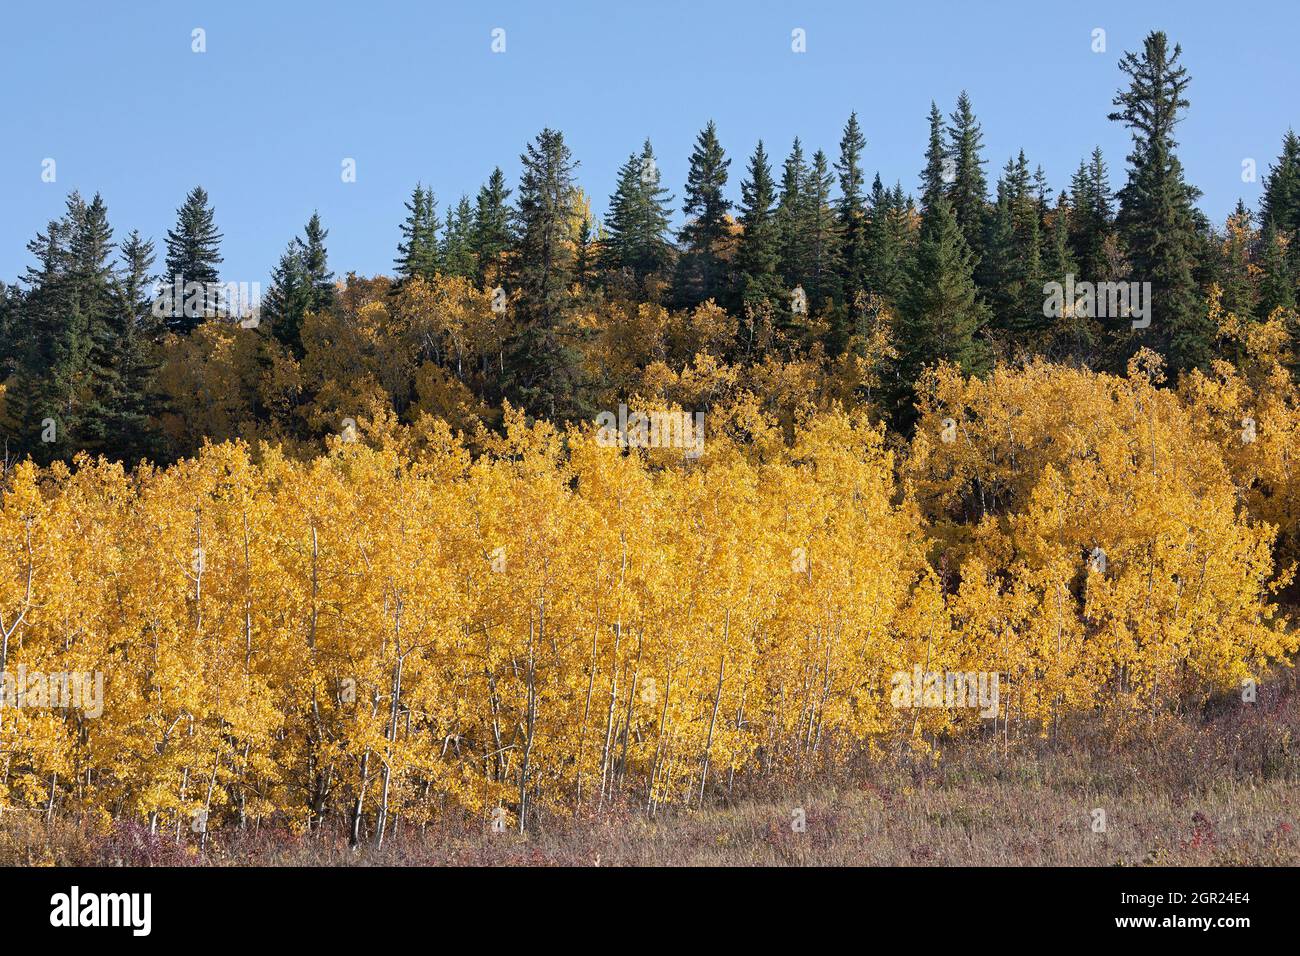 One of the most easterly stands of Douglas Fir forest in Canada with White Spruce and Trembling Aspen trees in autumn foliage, Edworthy Park, Calgary Stock Photo